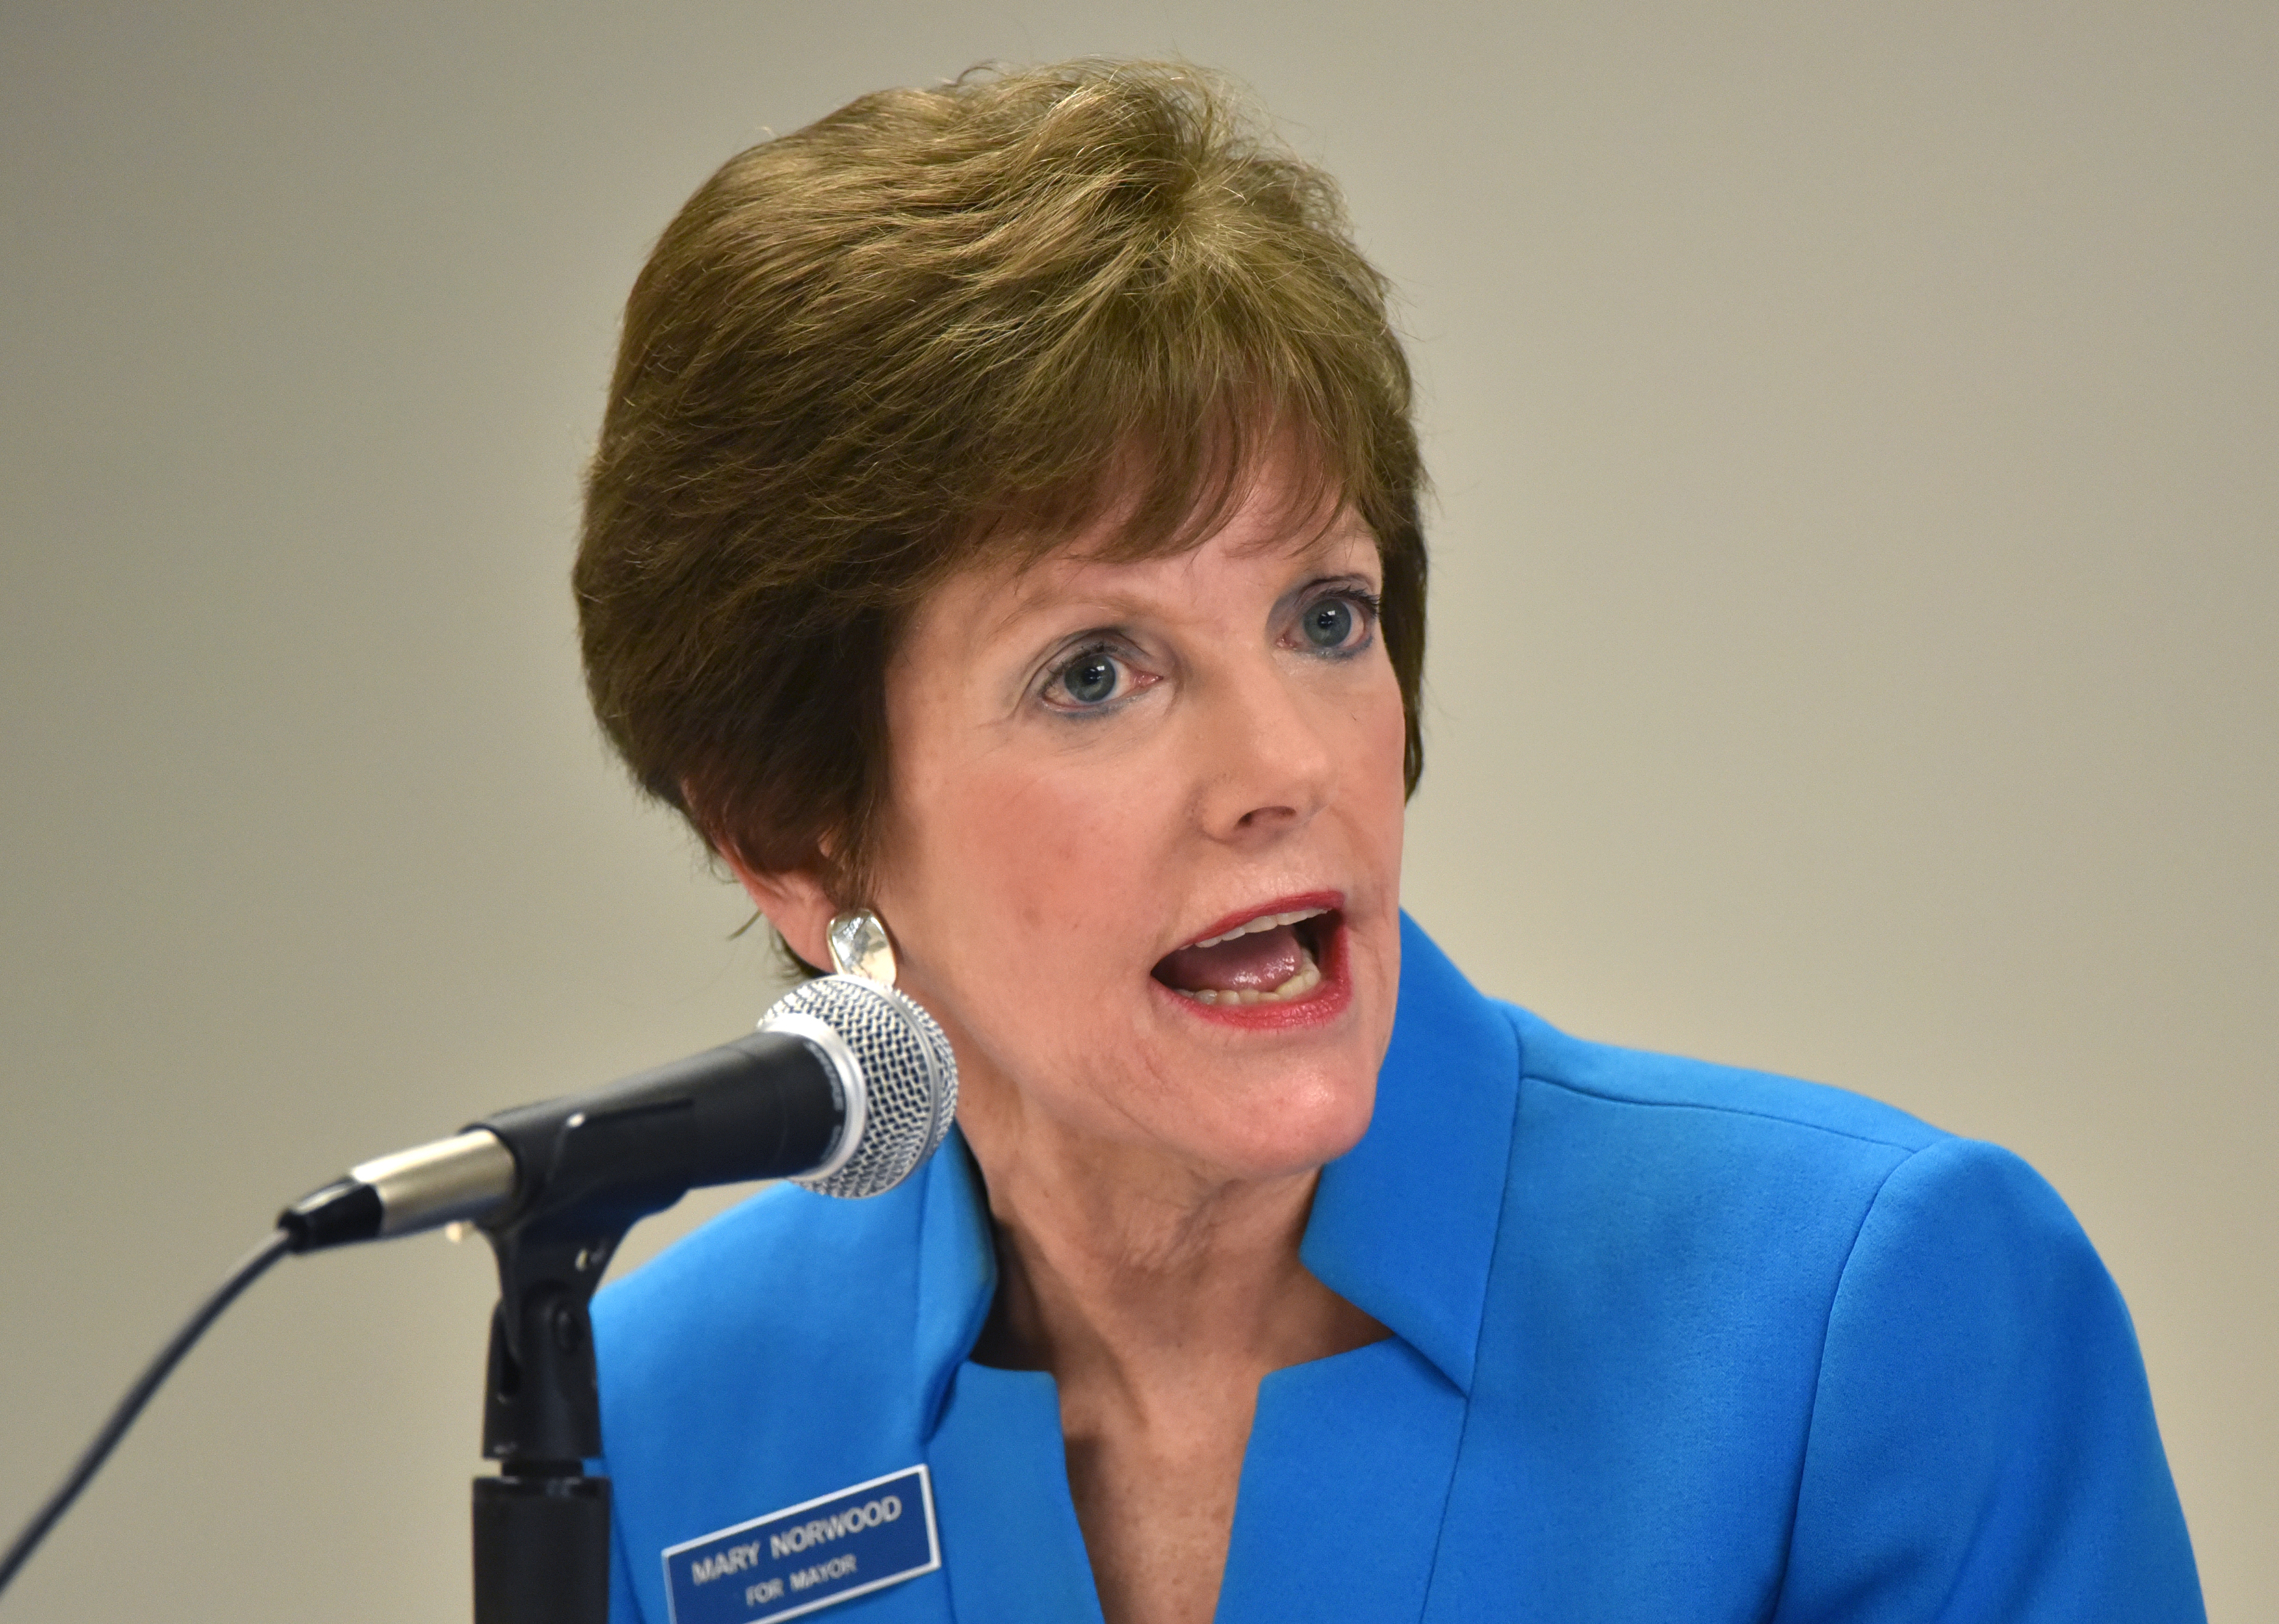 Mary Norwood picks up an early endorsement from Atlanta police union